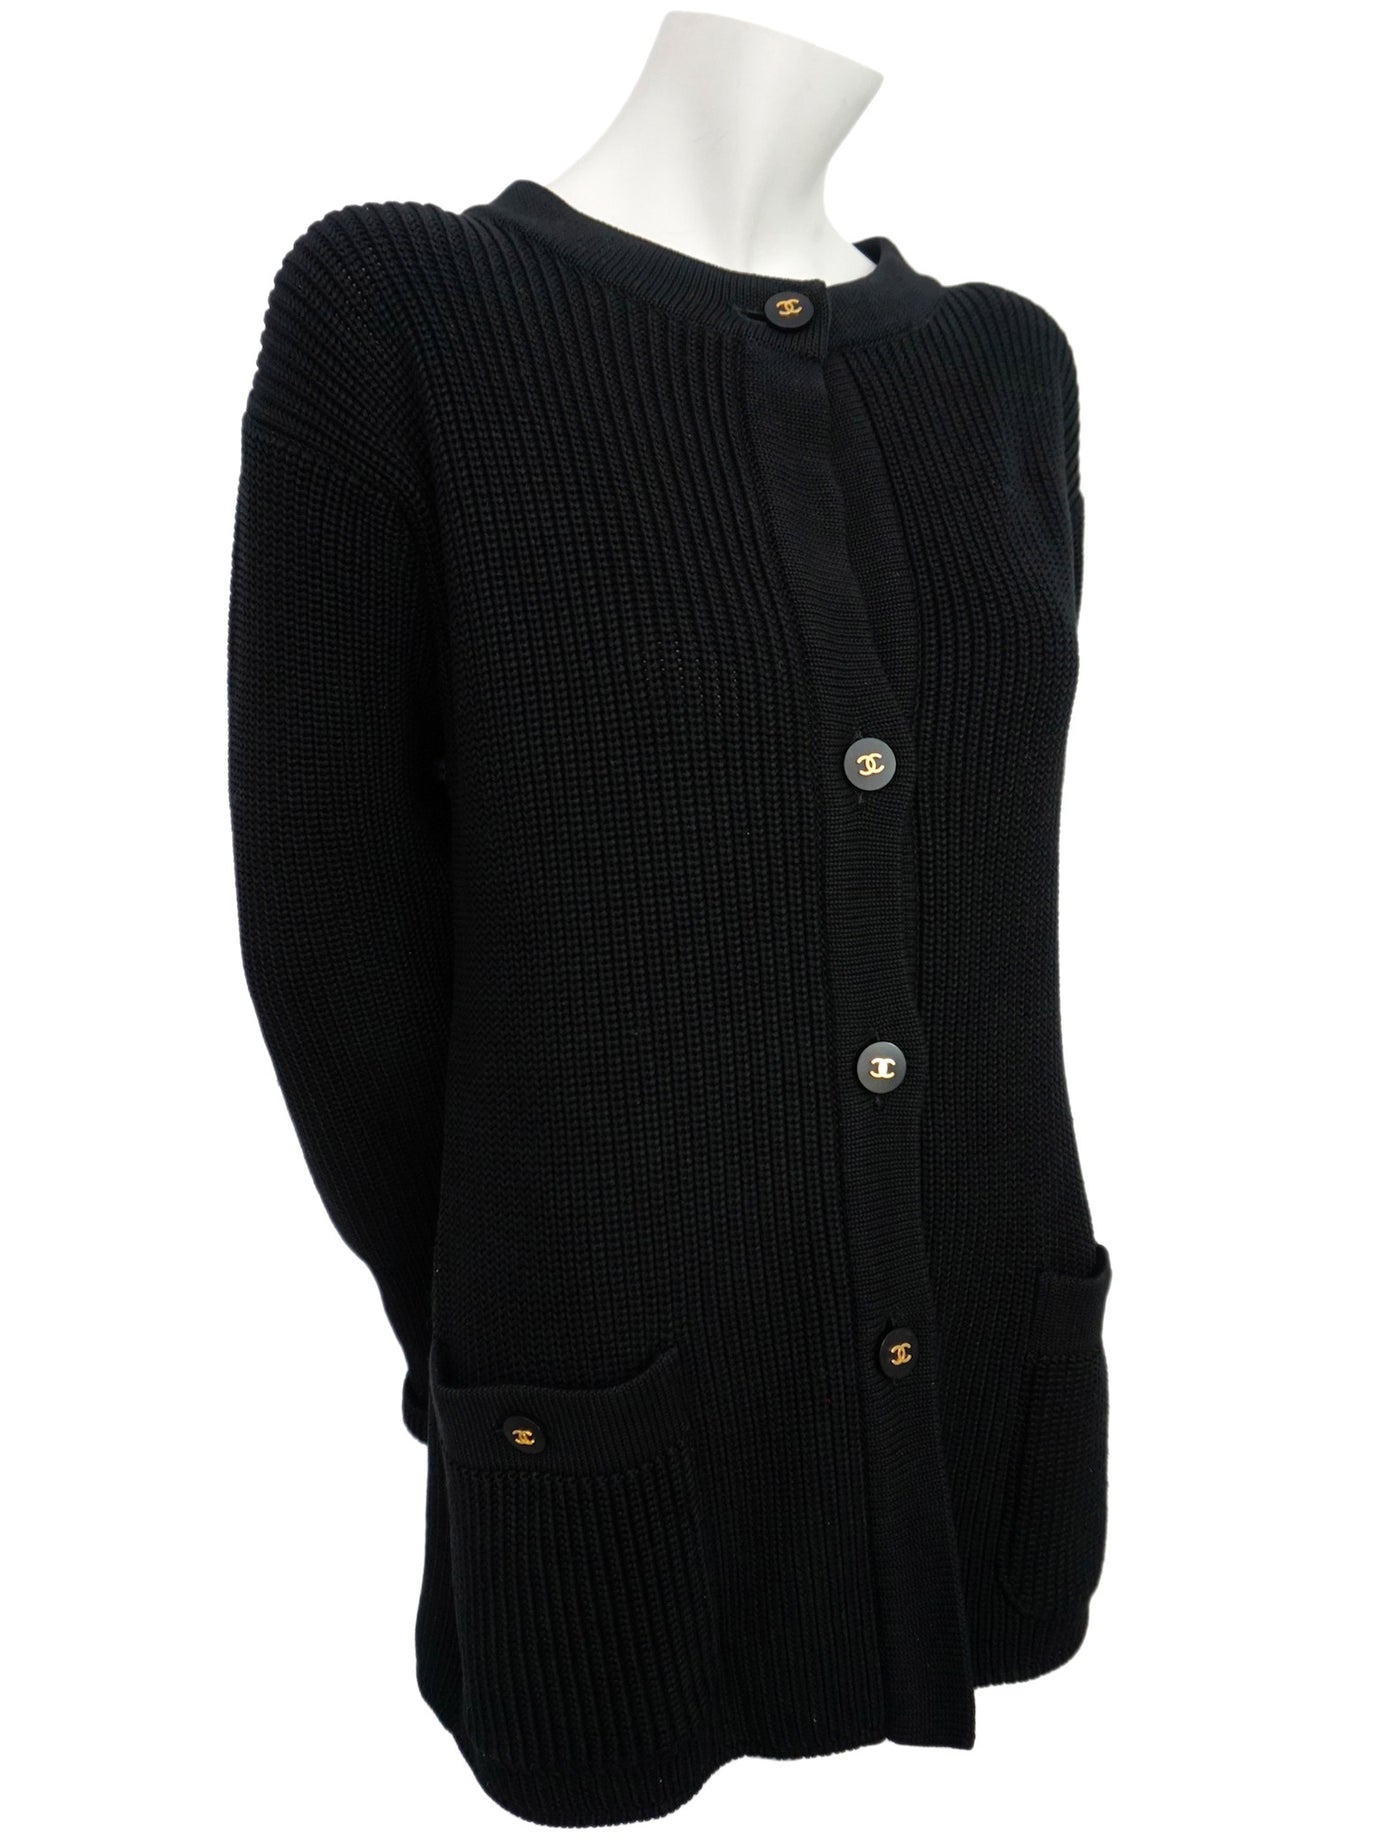 Authentic Chanel Classic Black Wool Blend Cardigan Sweater Jacket